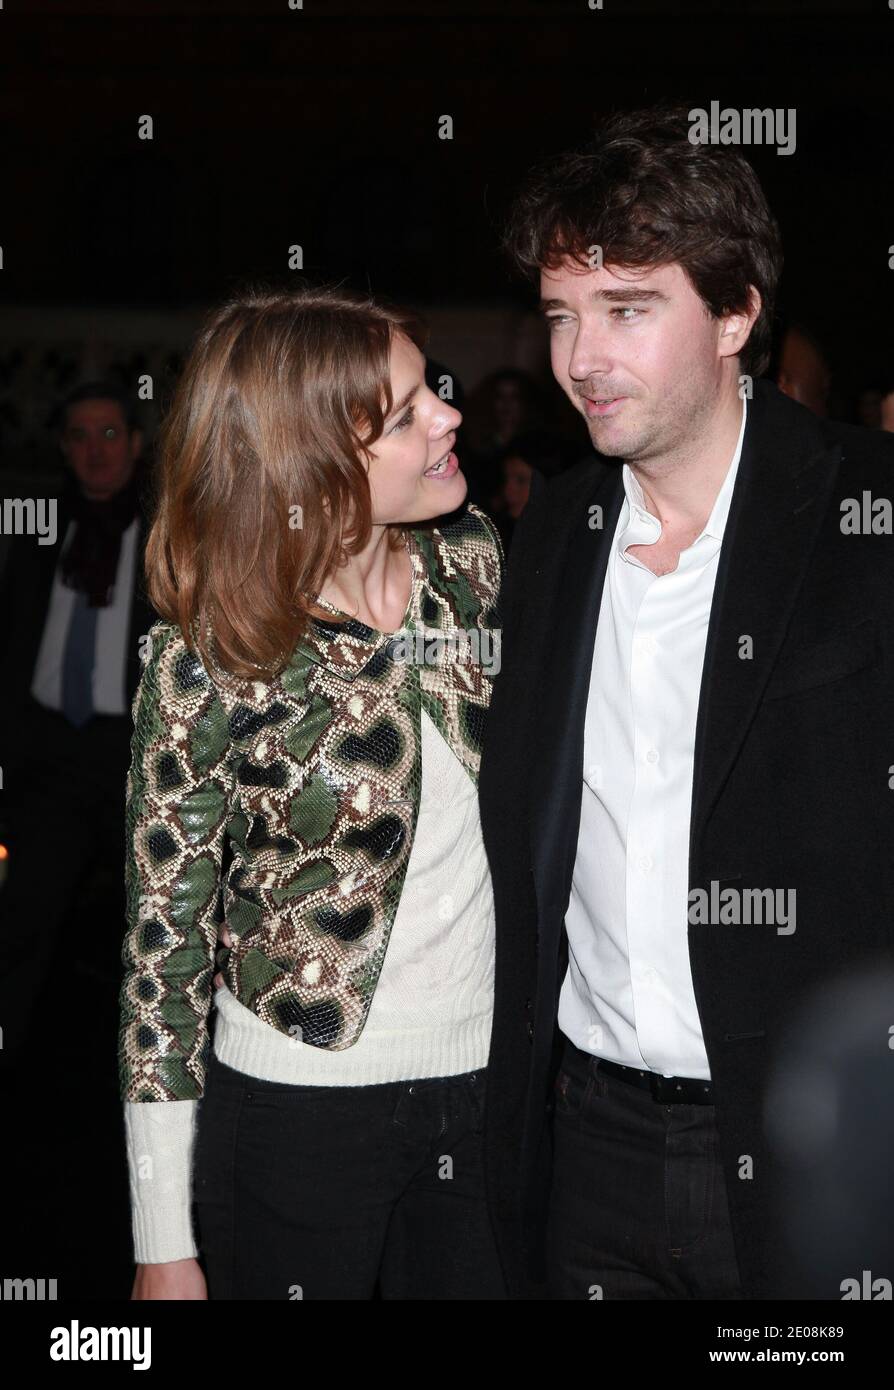 Antoine Arnault wife model Natalia Vodianova and kids comes to the 90th  Disney anniversary party in Paris Disneyland Stock Photo - Alamy